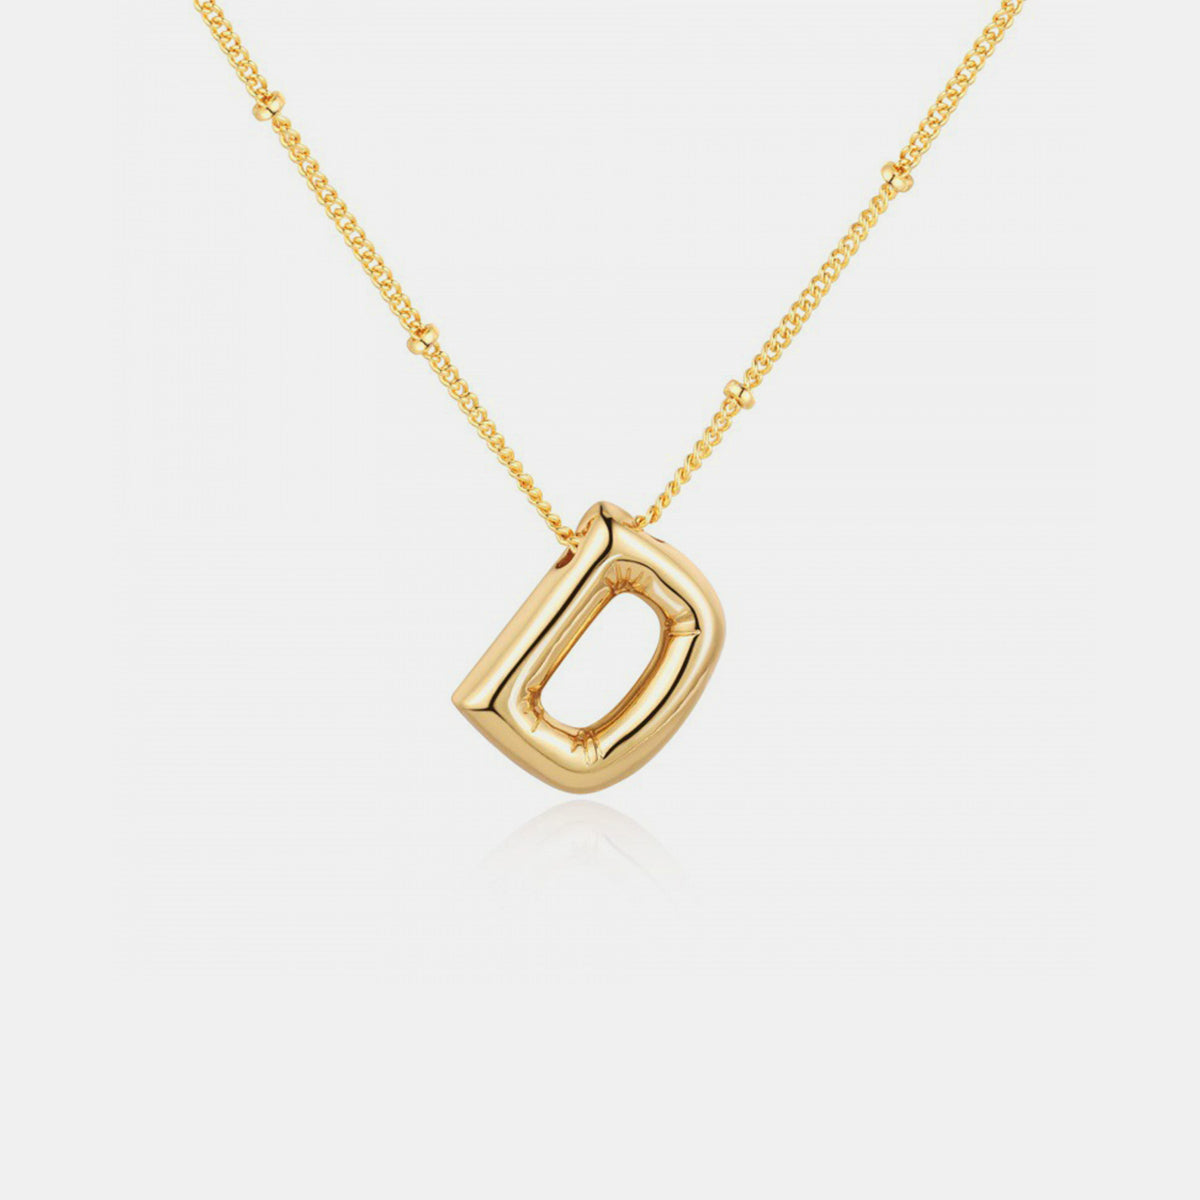 TEEK - A-J Gold-Plated Letter Necklace JEWELRY TEEK Trend Style D  